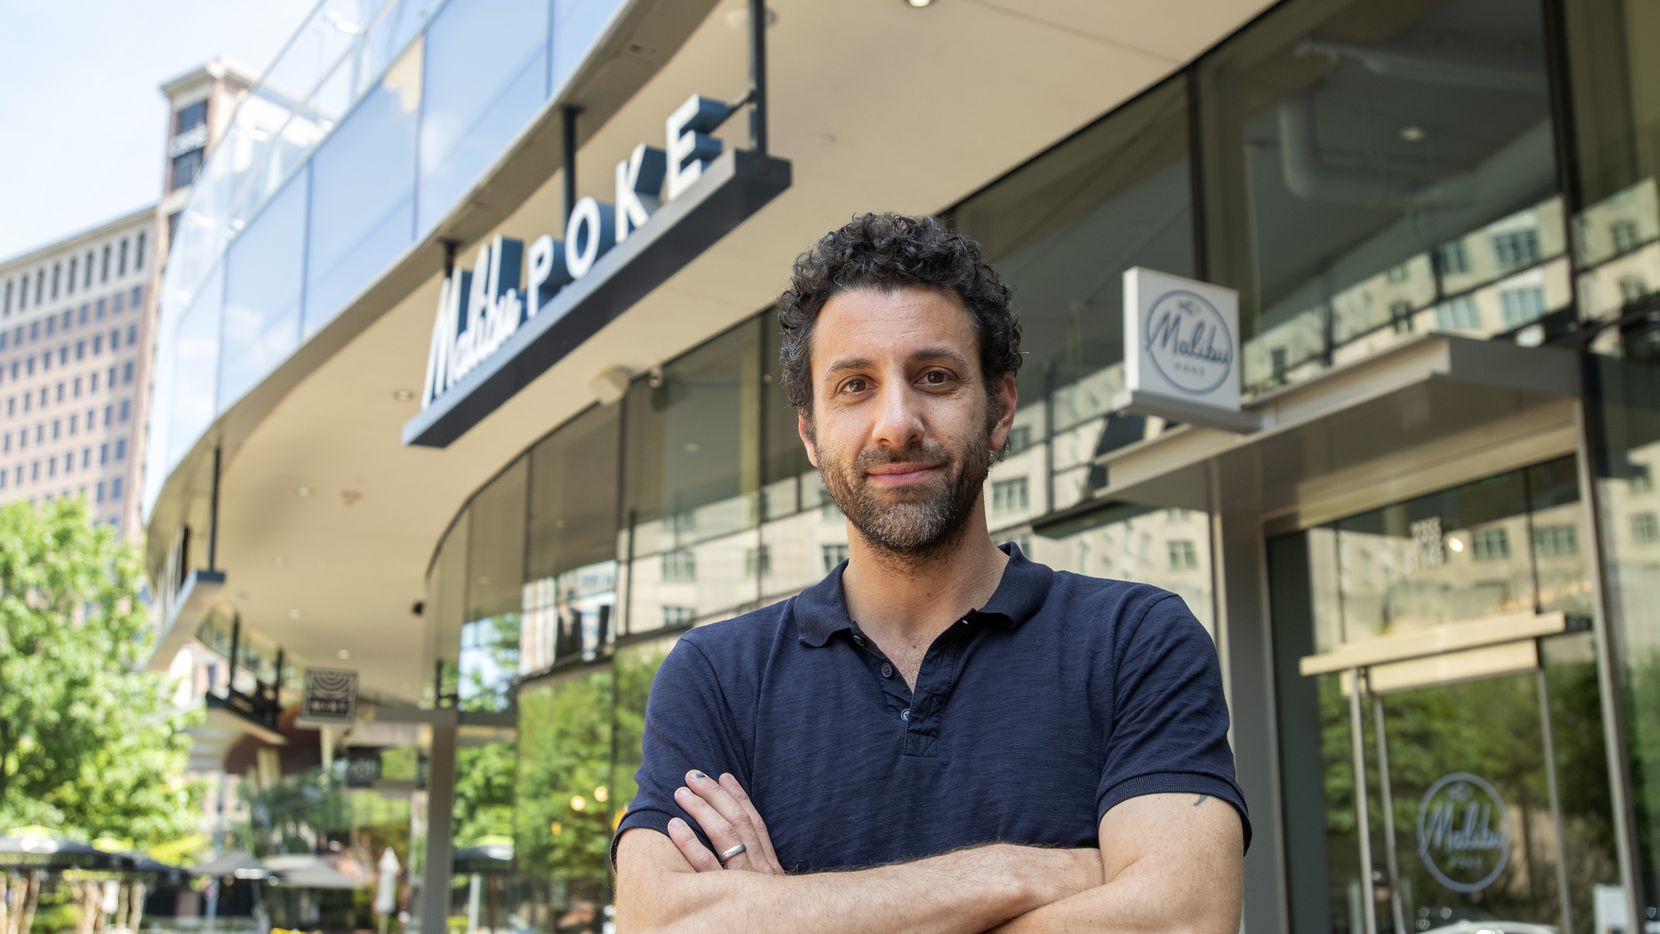 Jon Alexis, owner of TJ's Fresh Seafood and Malibu Poke, poses for a portrait outside one of his uptown restaurants on Tuesday, April 21, 2020 in Dallas.